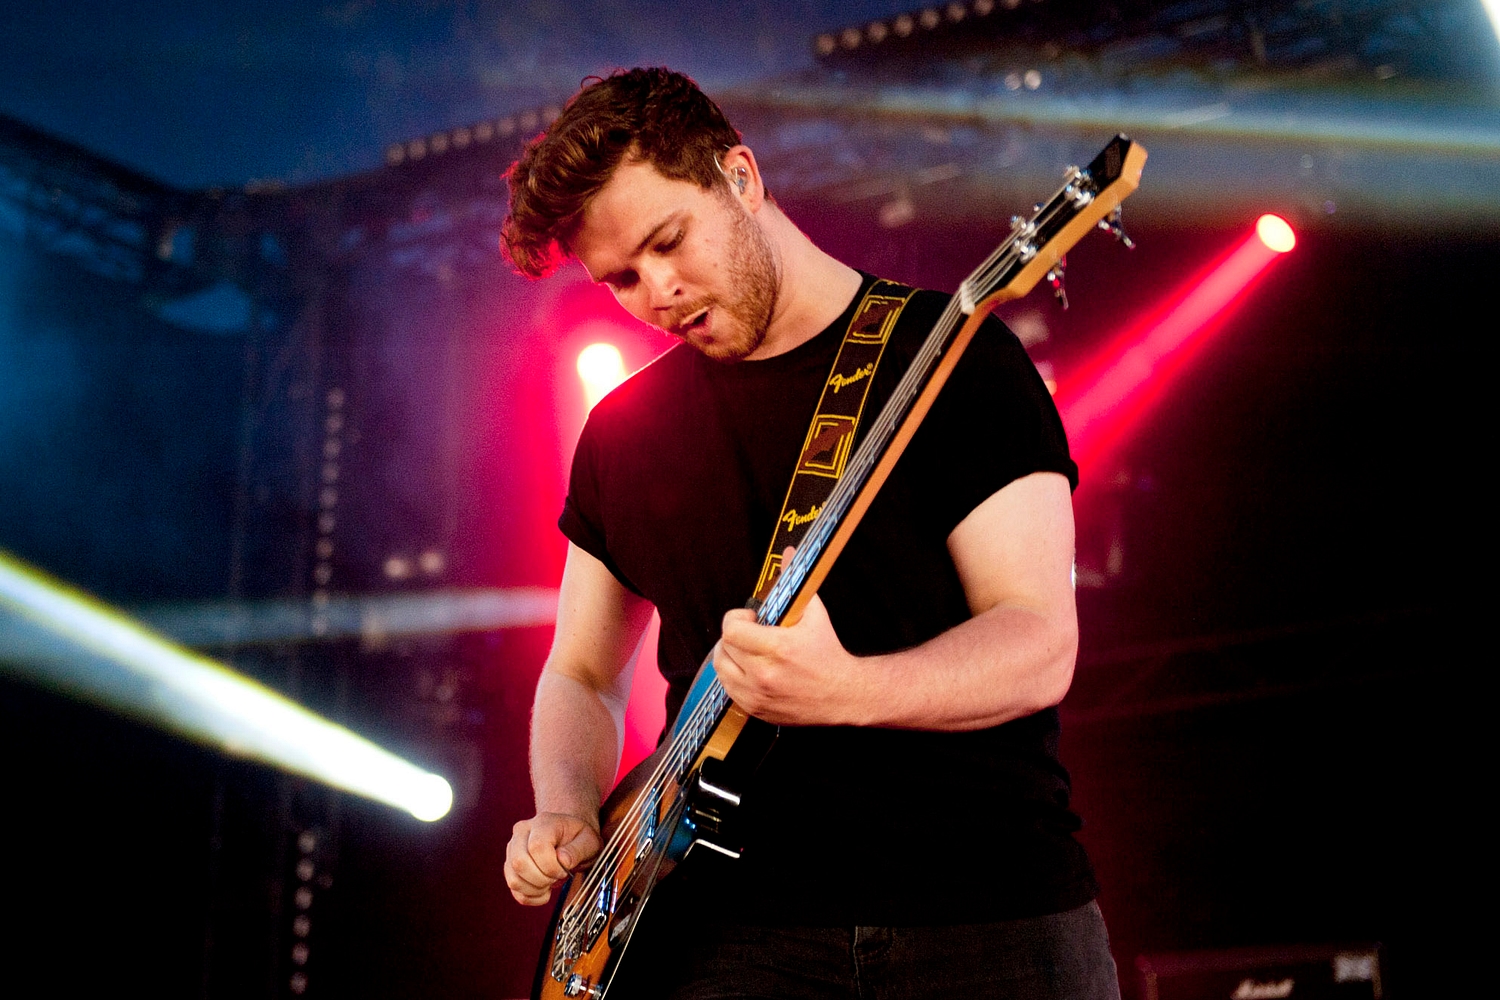 Royal Blood’s UK tour sells out in two minutes